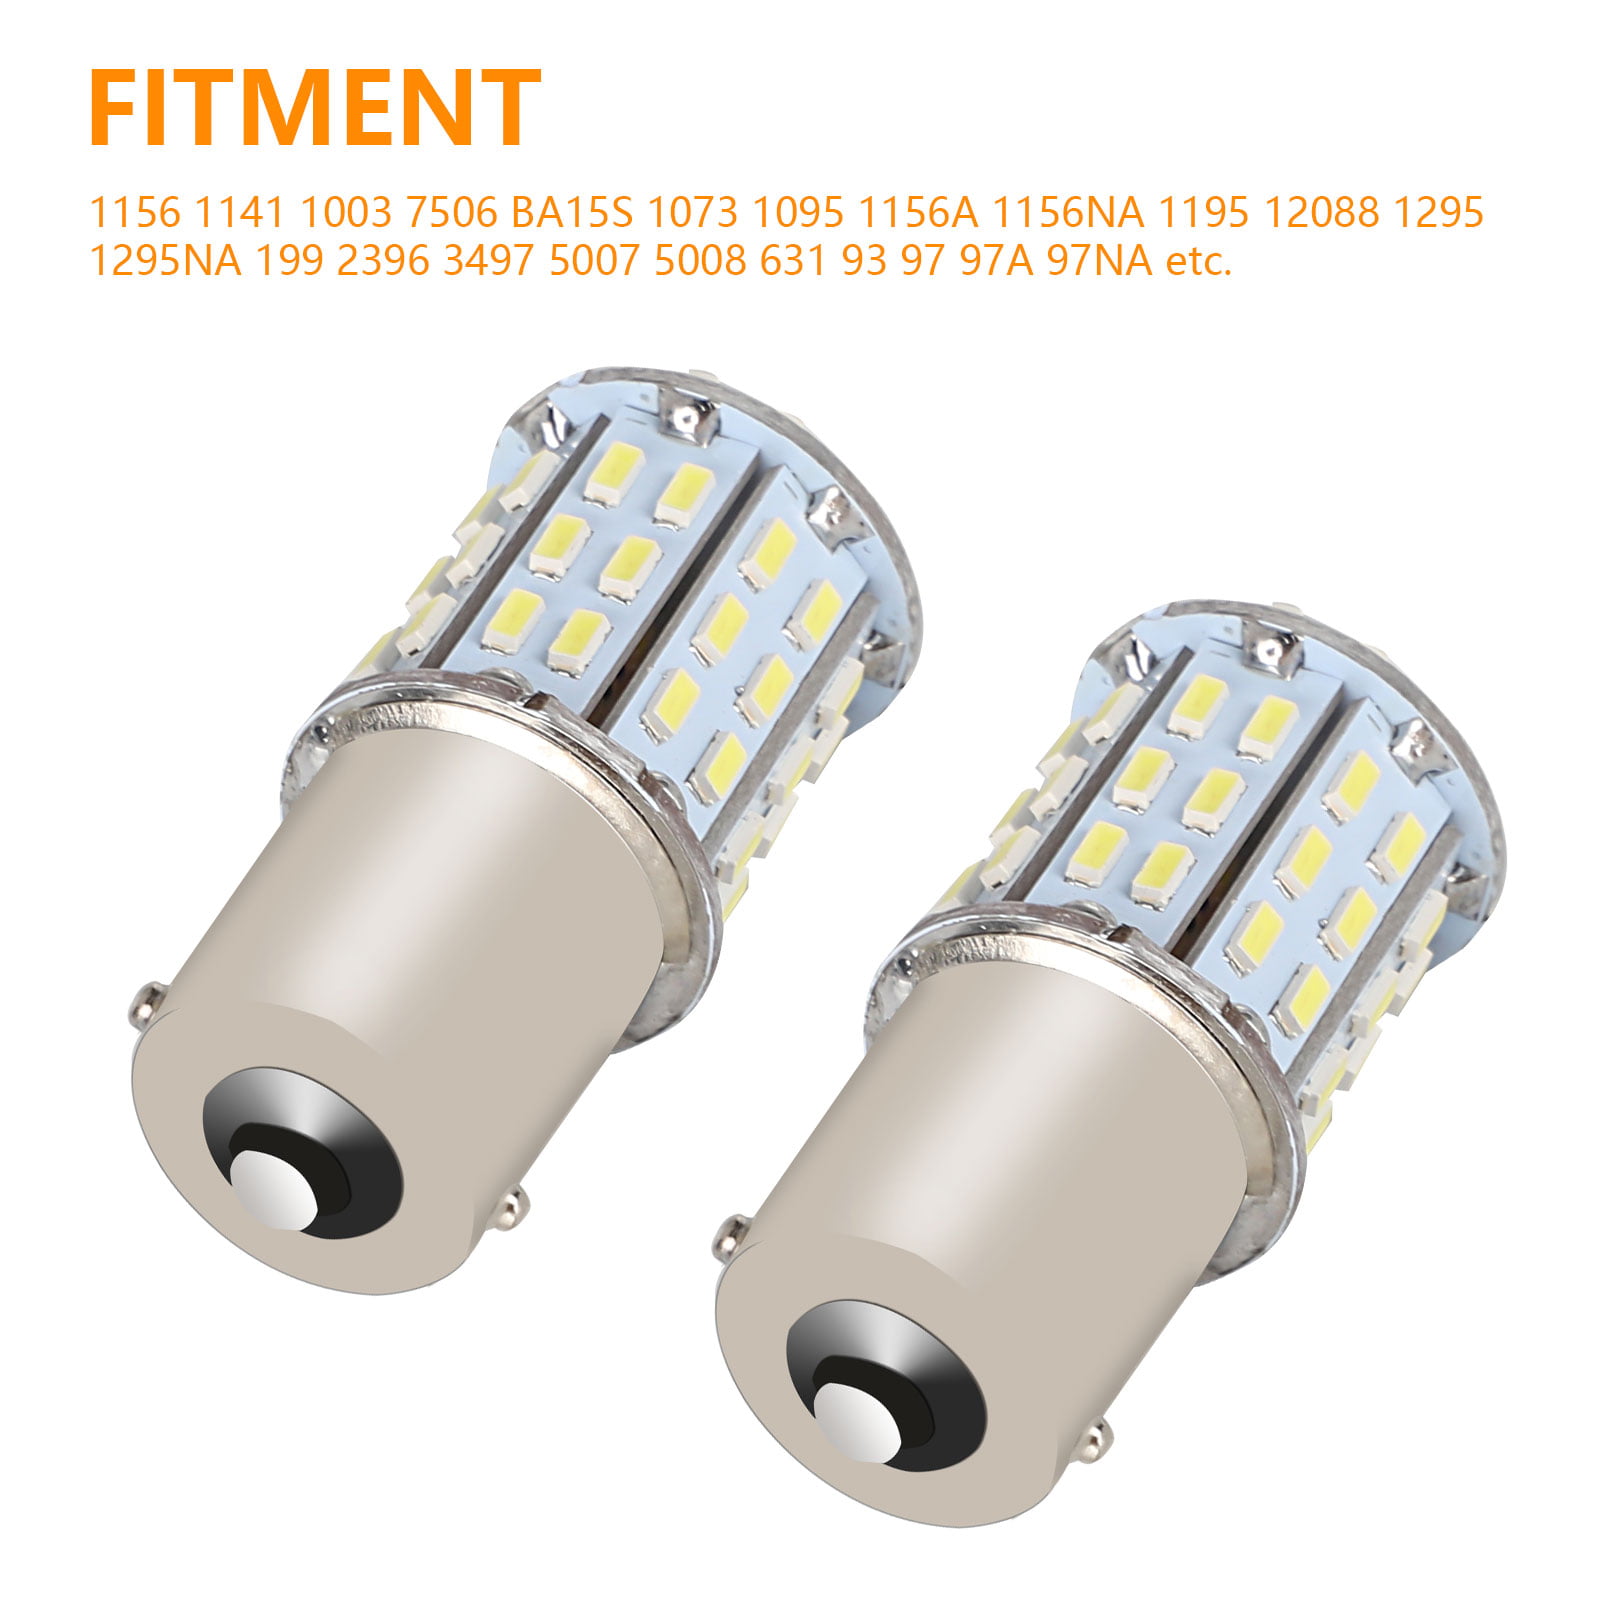 AOKEzl Extremely Bright 1156 1141 BA15S 7506 54-SMD 3014 LED Bulbs for Car Interior RV Camper 6000K Xenon White Pack of 20 